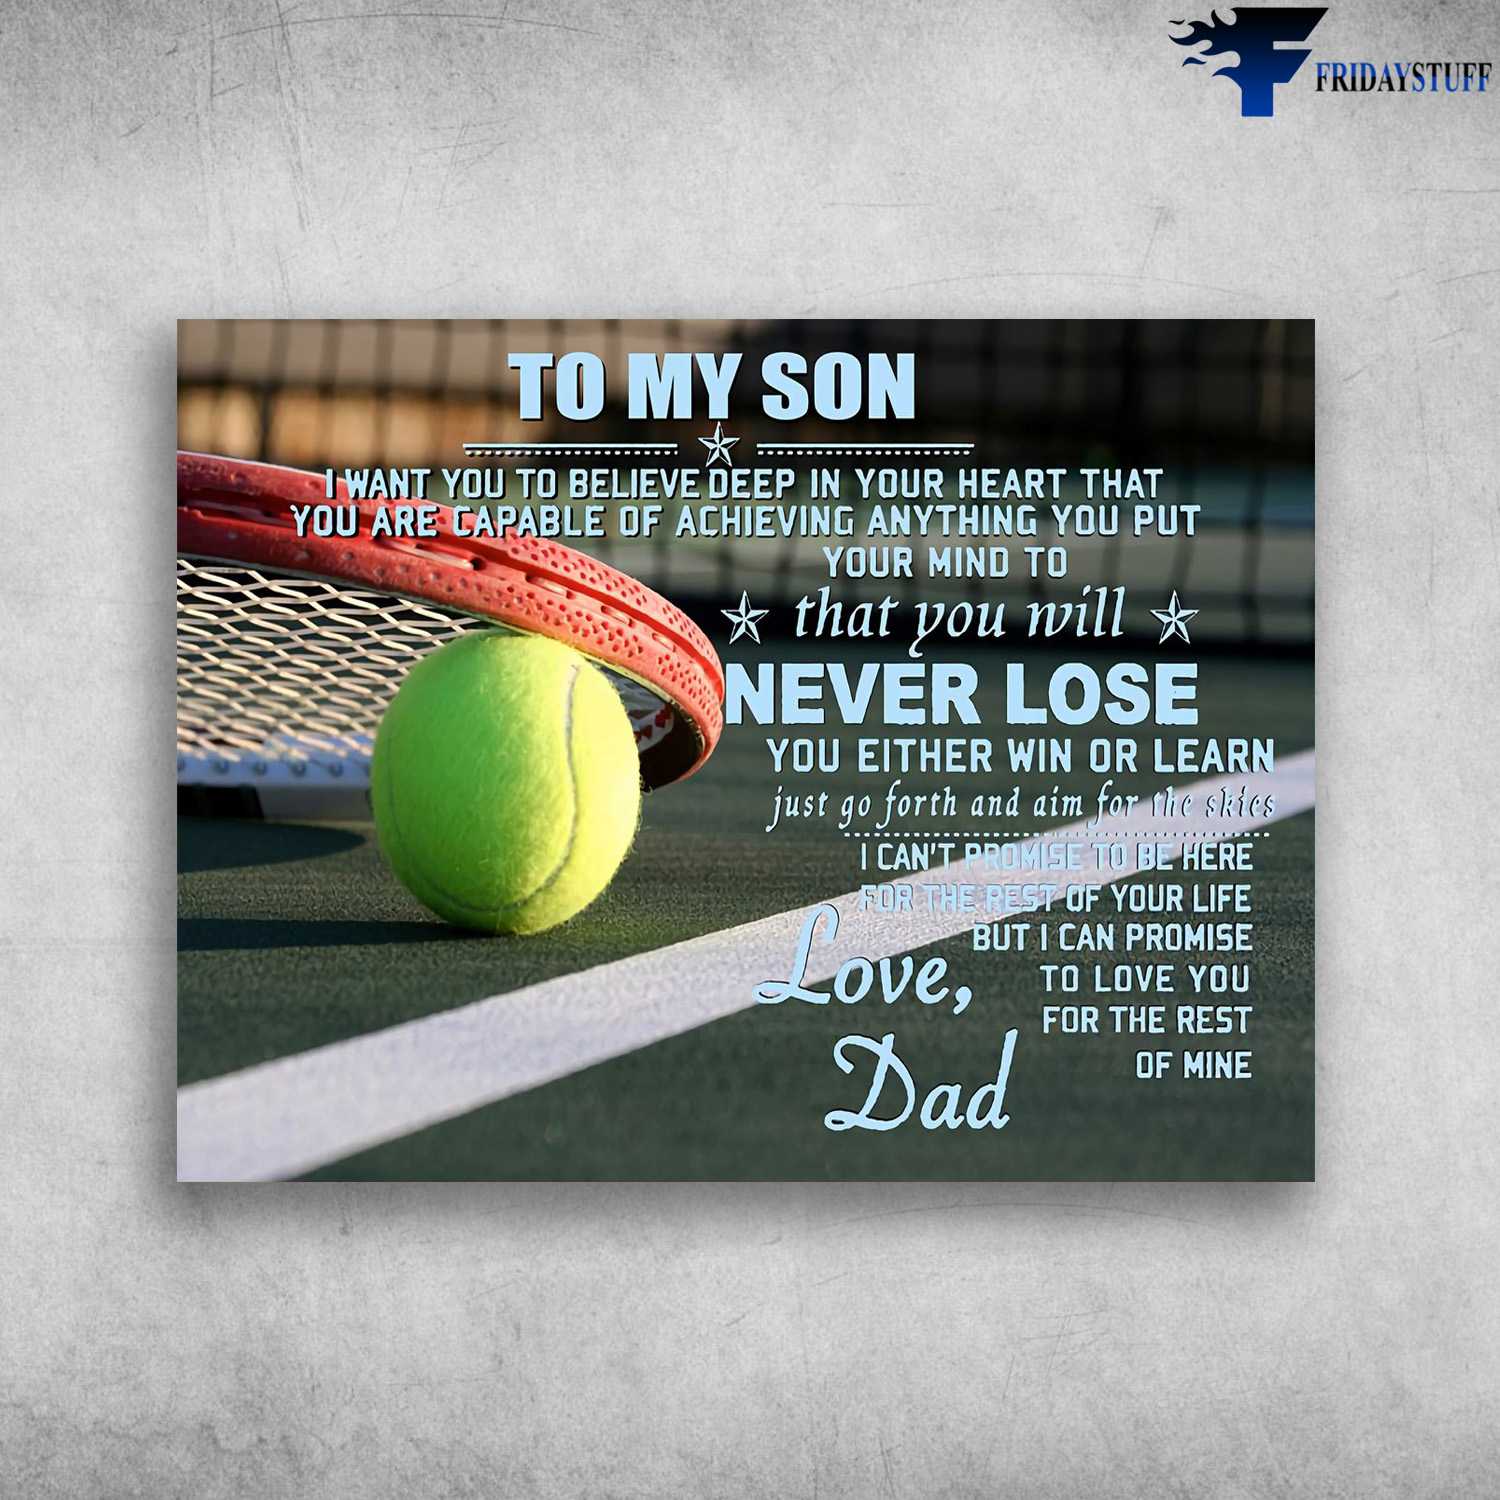 Tennis Poster, Dad And Son - To My Son, I Want You To Believe, Deep In Your Heart, That You Can Capable Of Achieving Anything You Put